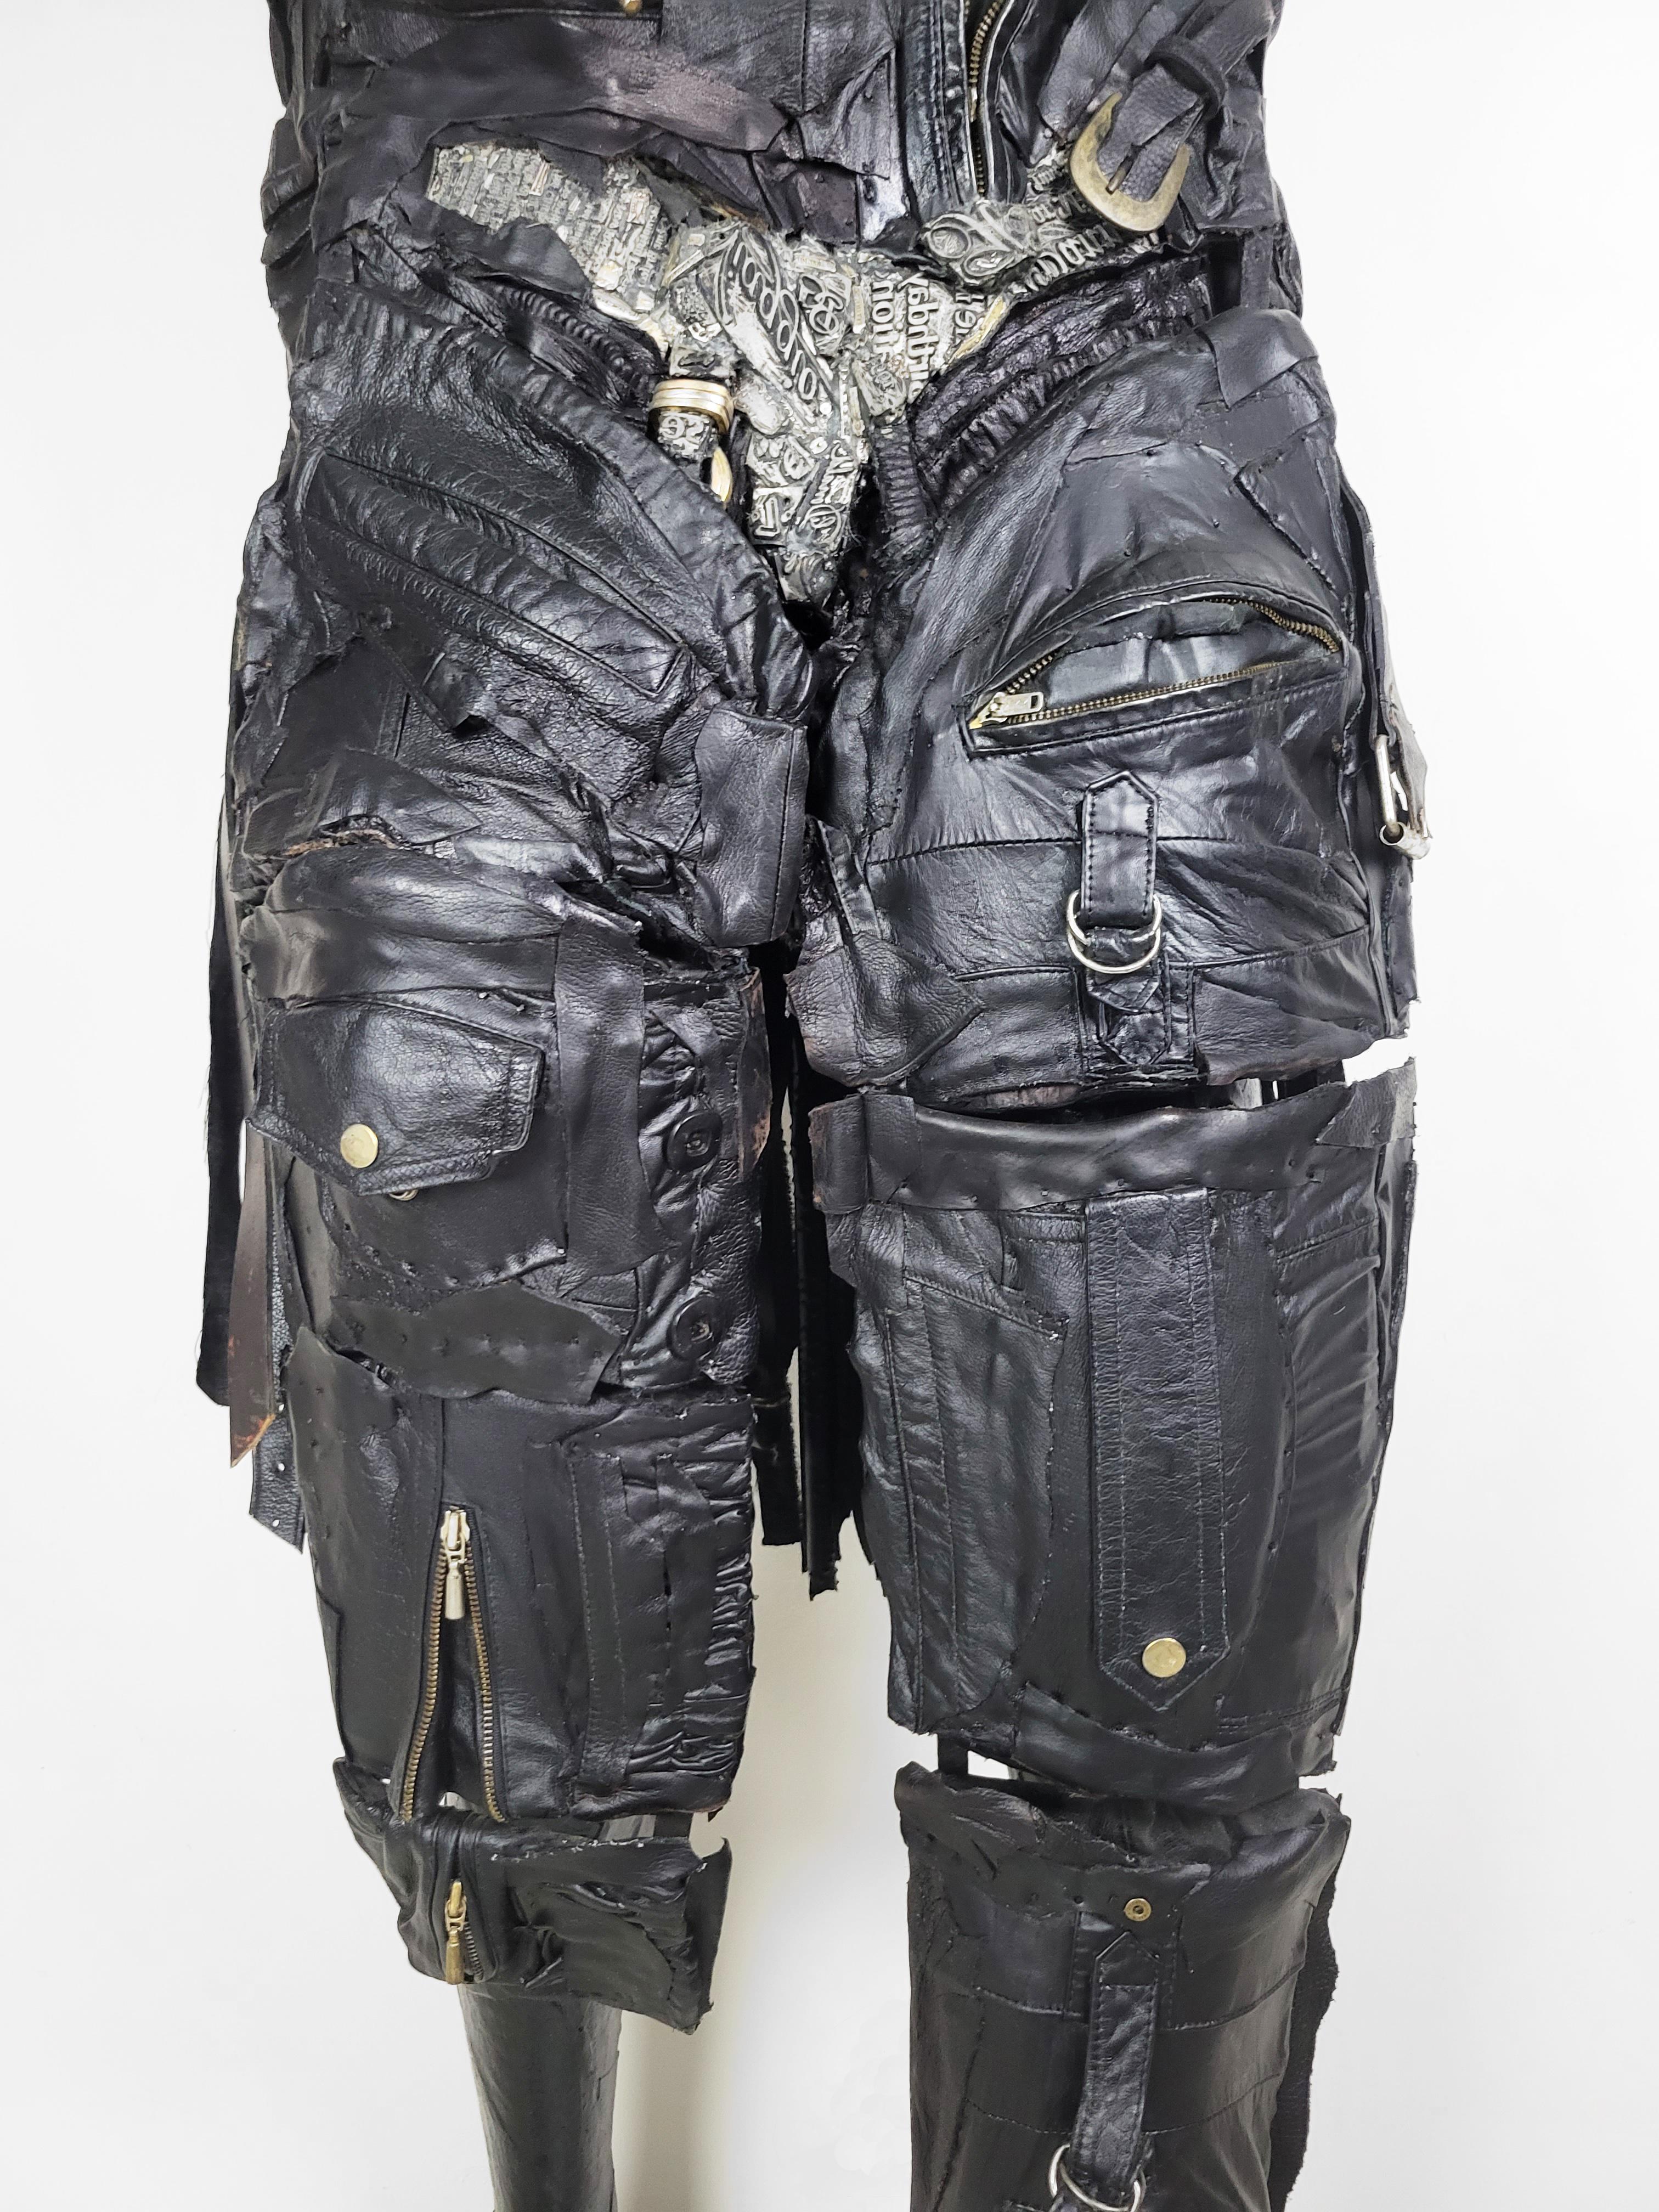 Linda Stein, Tough Love 683 - Contemporary Mixed Media Fashion Leather Sculpture

Tough Love 683 is from Linda Stein's Body-Swapping Armor series. These wearable sculptures are ambiguous and androgynous in form, allowing the wearer to explore new